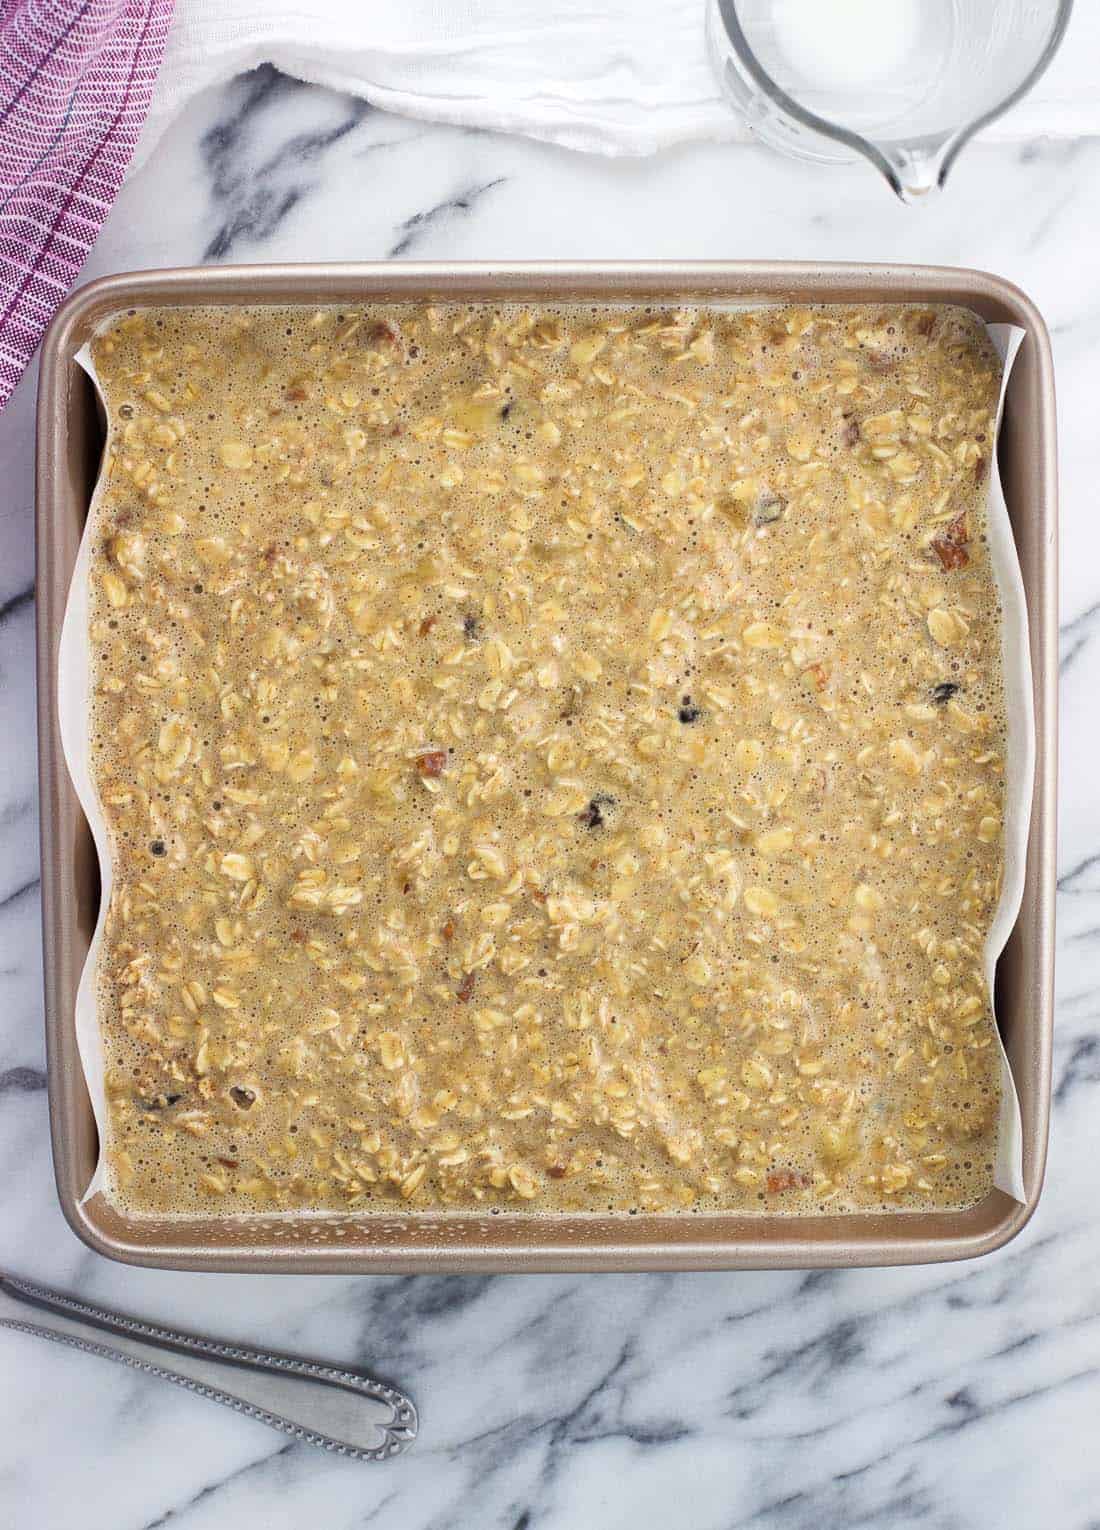 Oatmeal batter in a parchment-lined square pan.